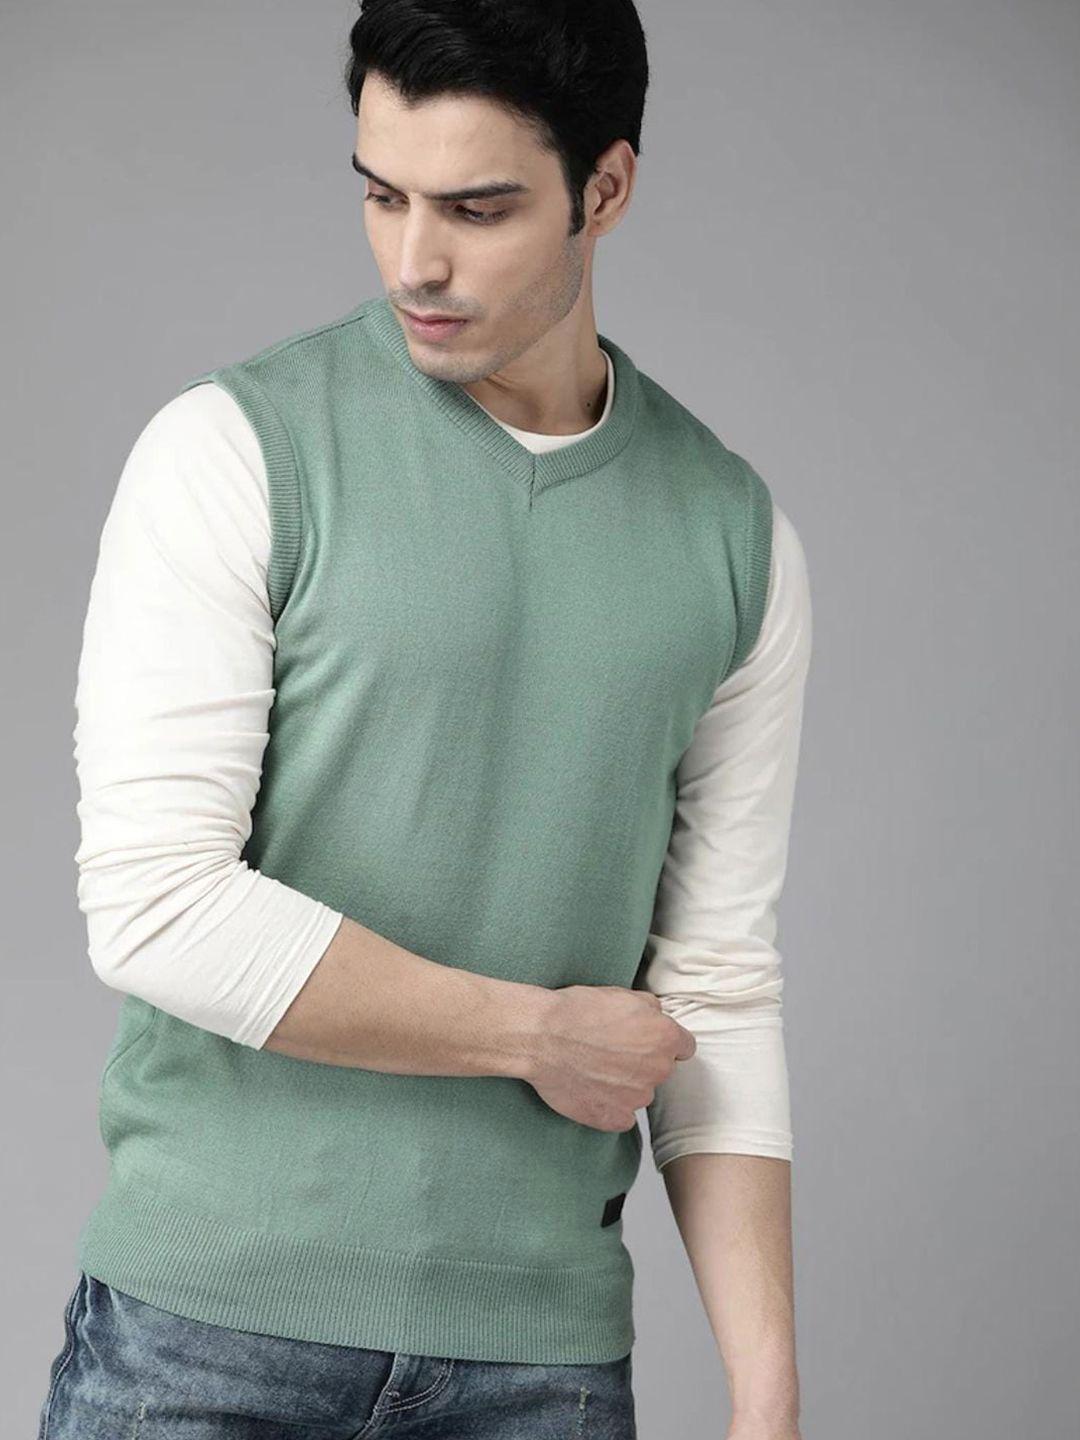 The Roadster Life Co. V-Neck Sleeveless Pure Acrylic Sweater Vest